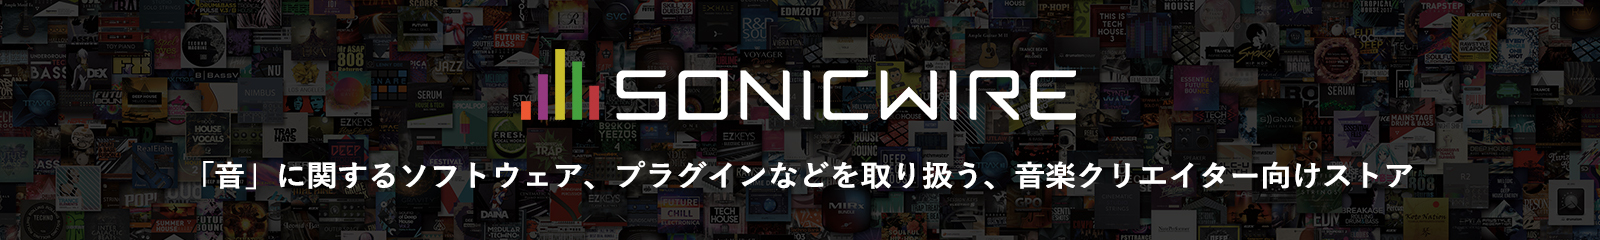 SONICWIRE